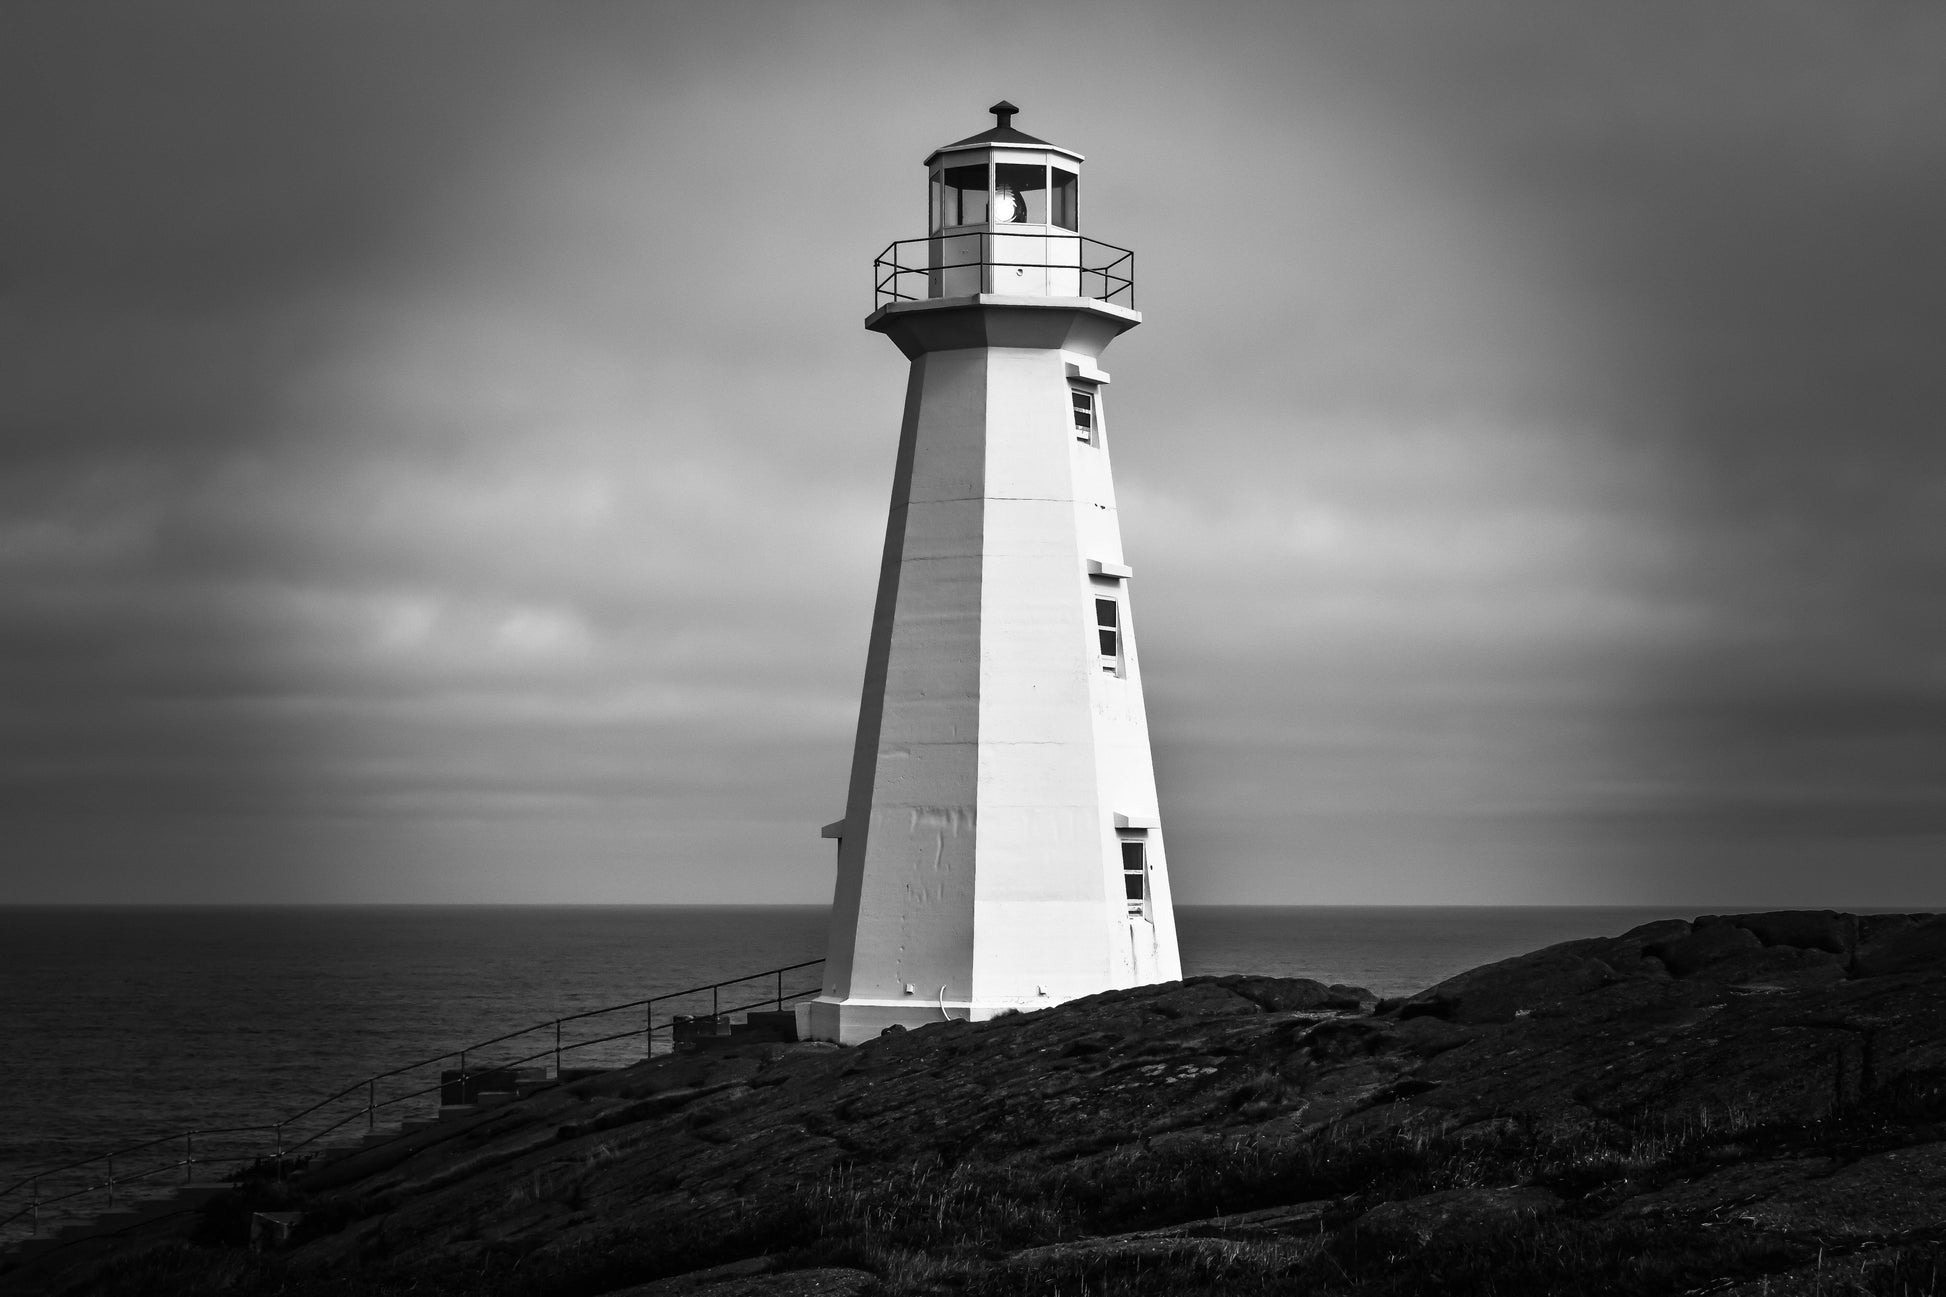 Canvas Framed "Cape Spear" B&W